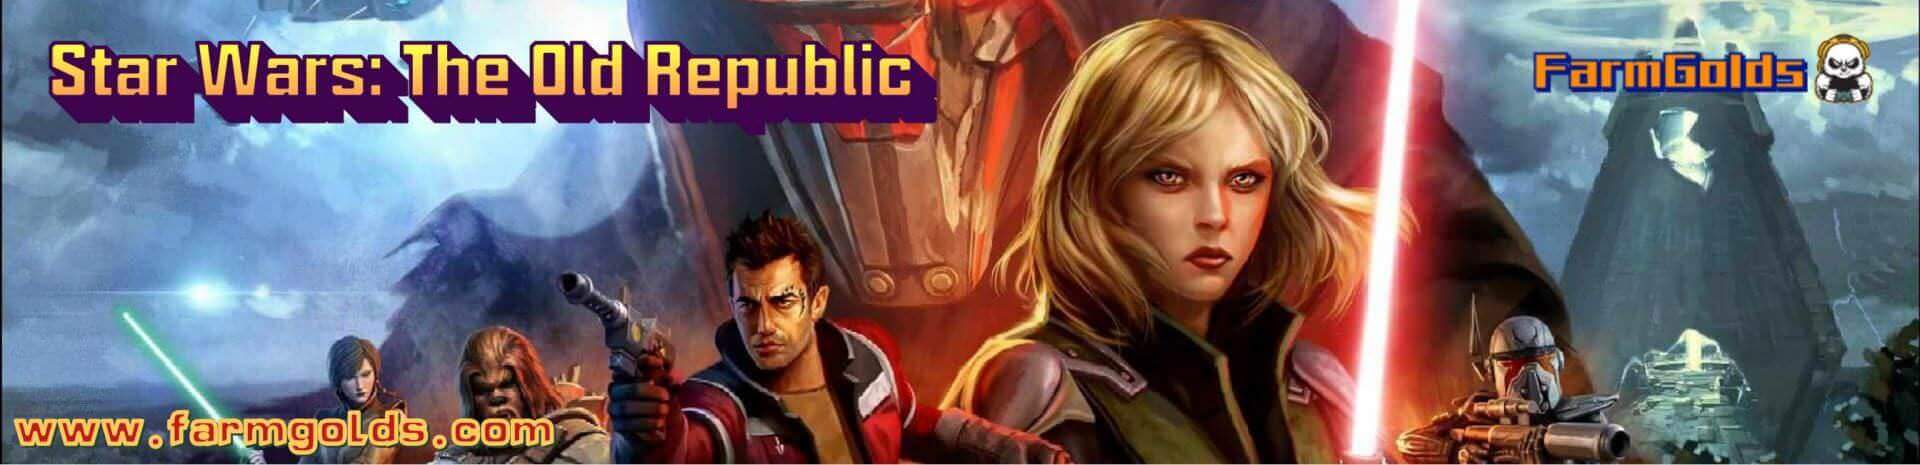 Buy Star Wars: The Old Republic Credit, cheap Star Wars: The Old Republic